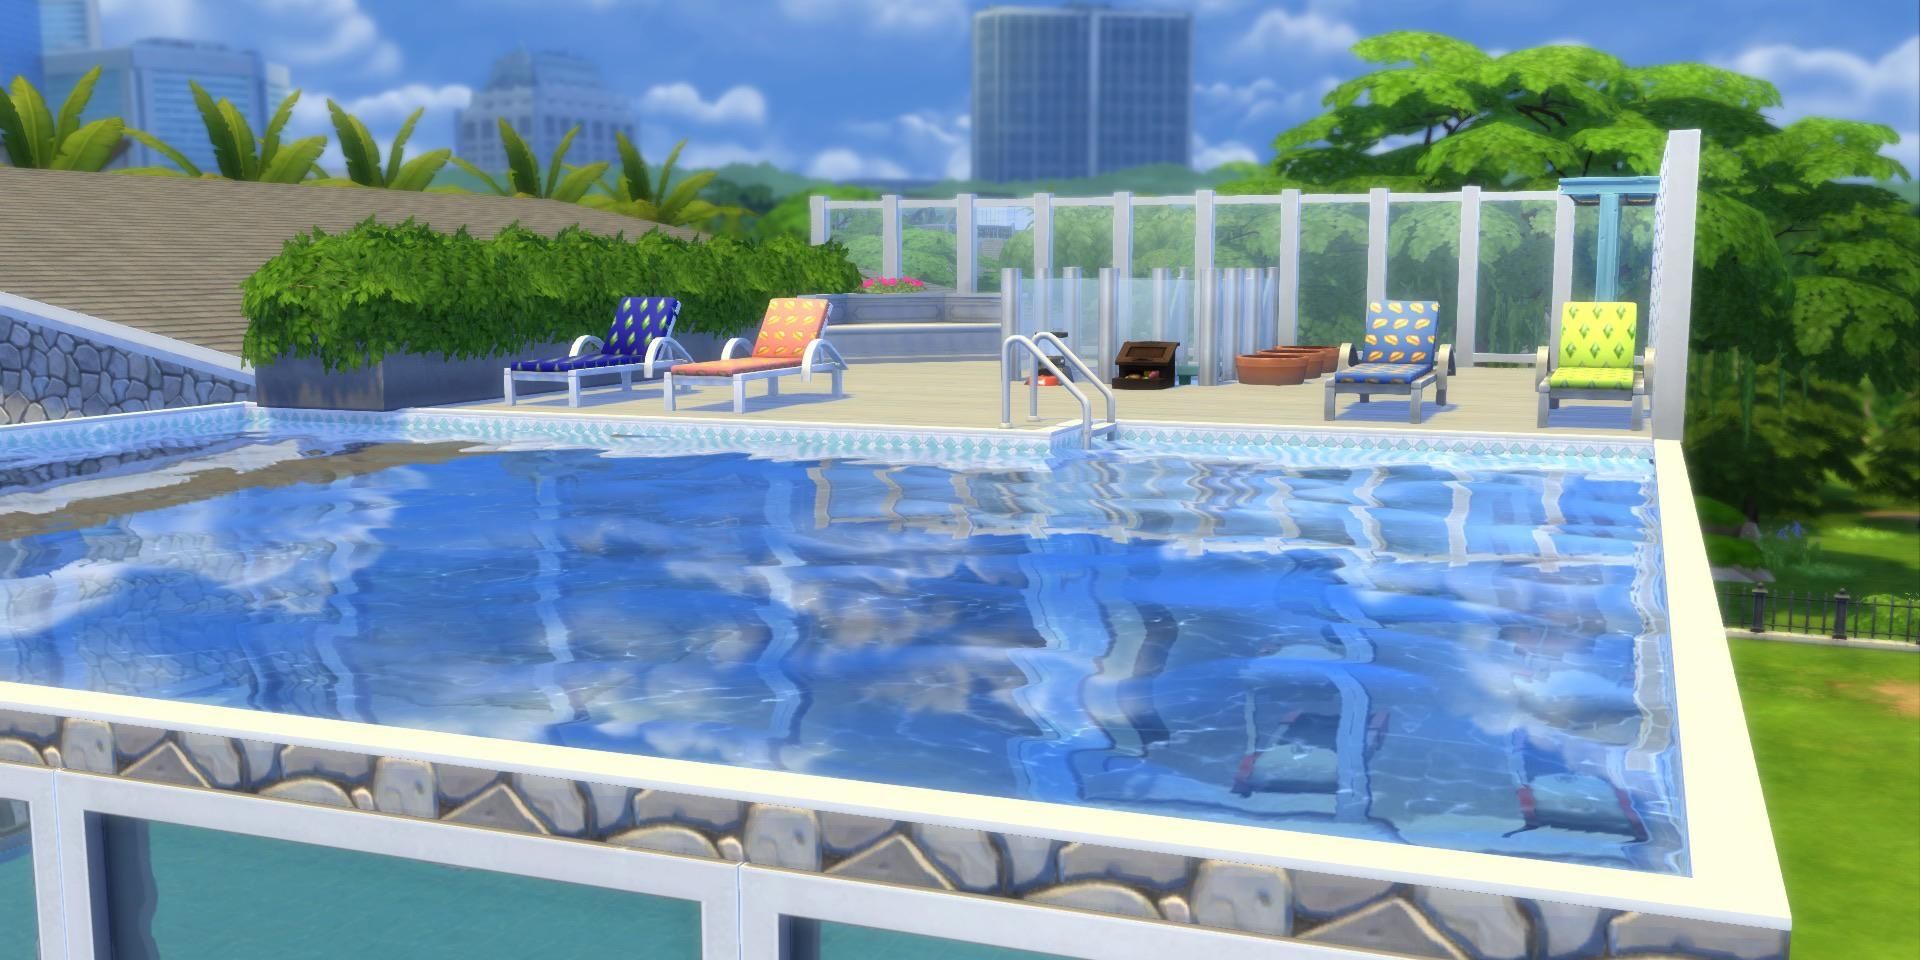 A pool in The Sims 4